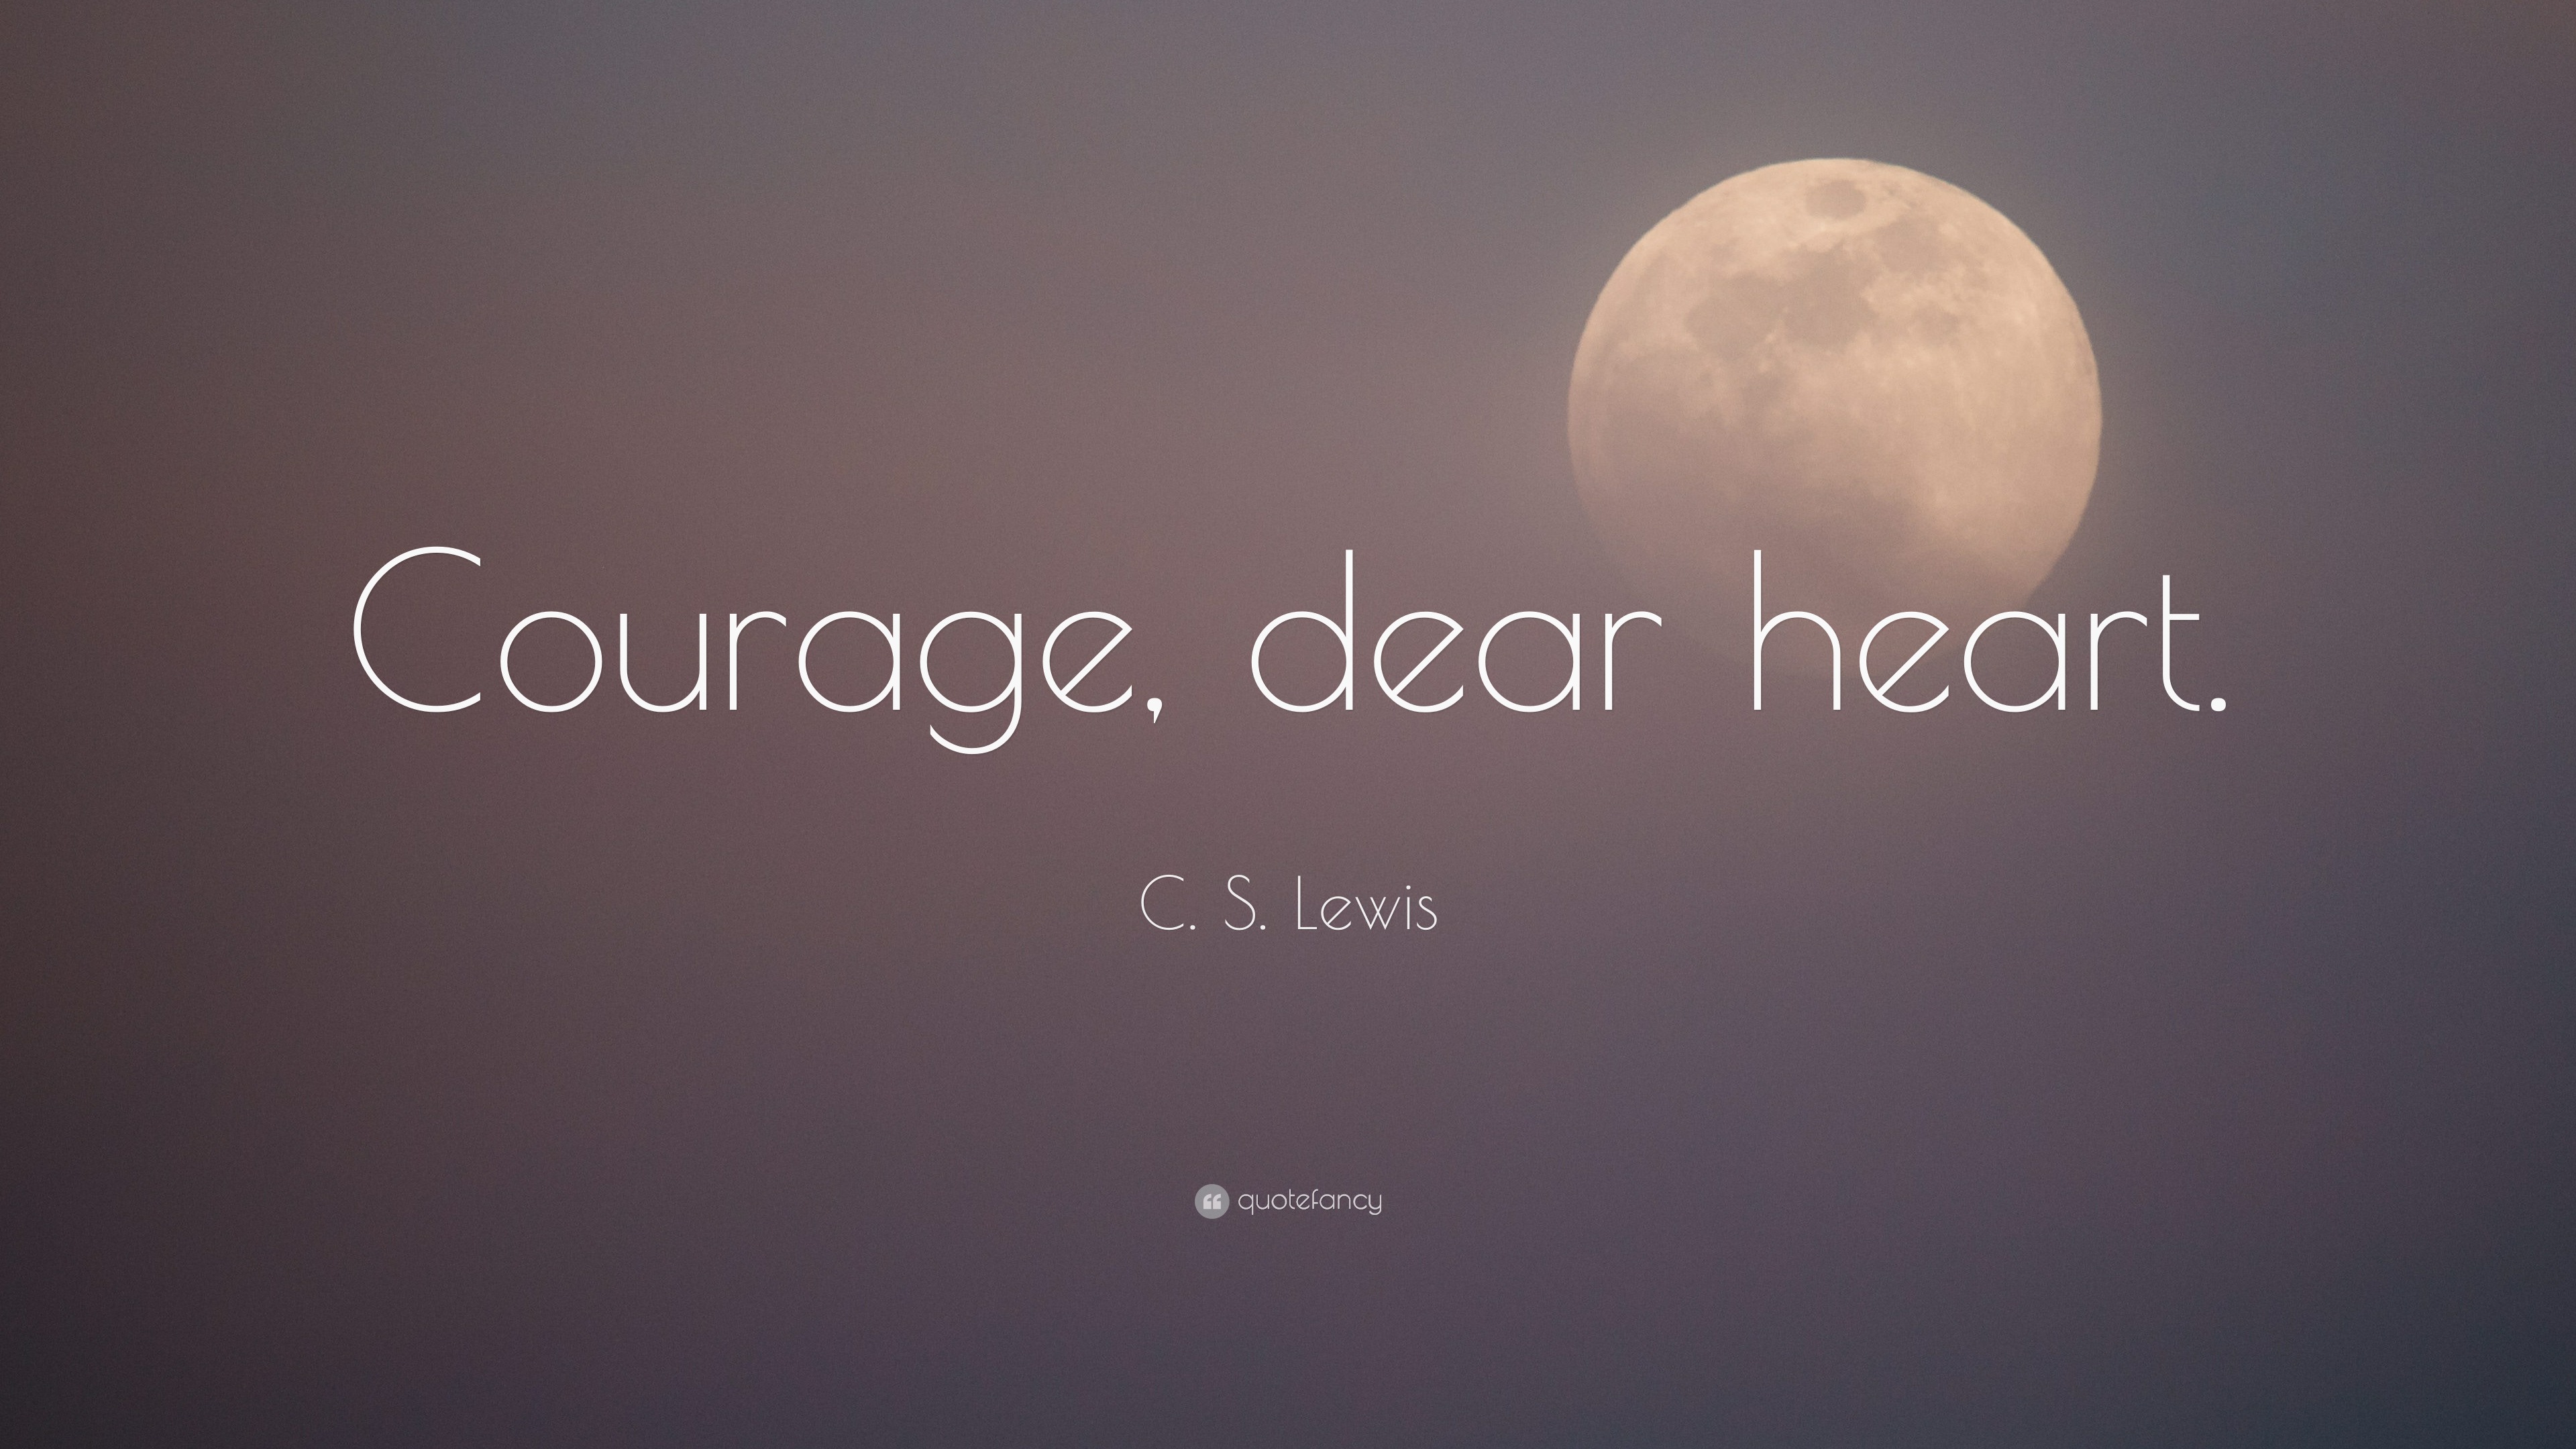 C. S. Lewis Quote: “Courage, dear heart.” (9 wallpapers) - Quotefancy